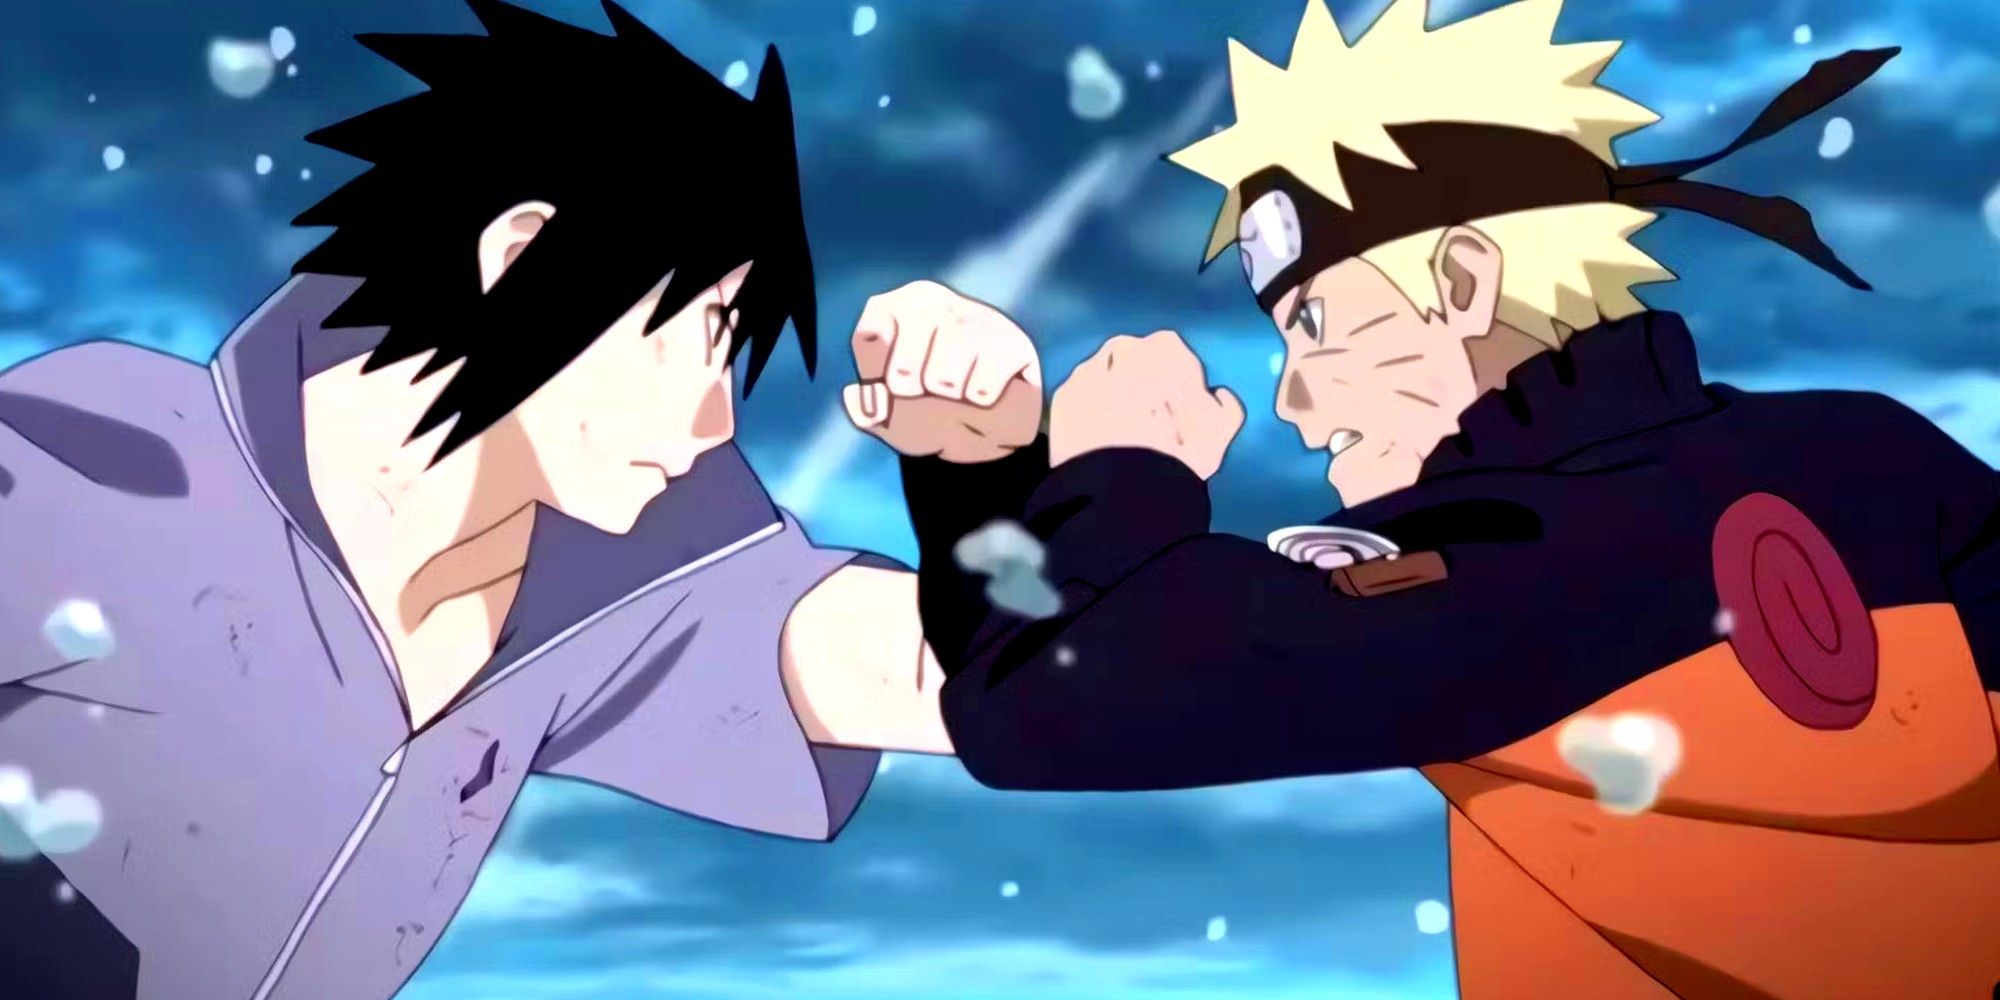 Screenshot from Naruto Shippuden shows naruto and sasuke locking fists in the first attack in their final battle from episode 476